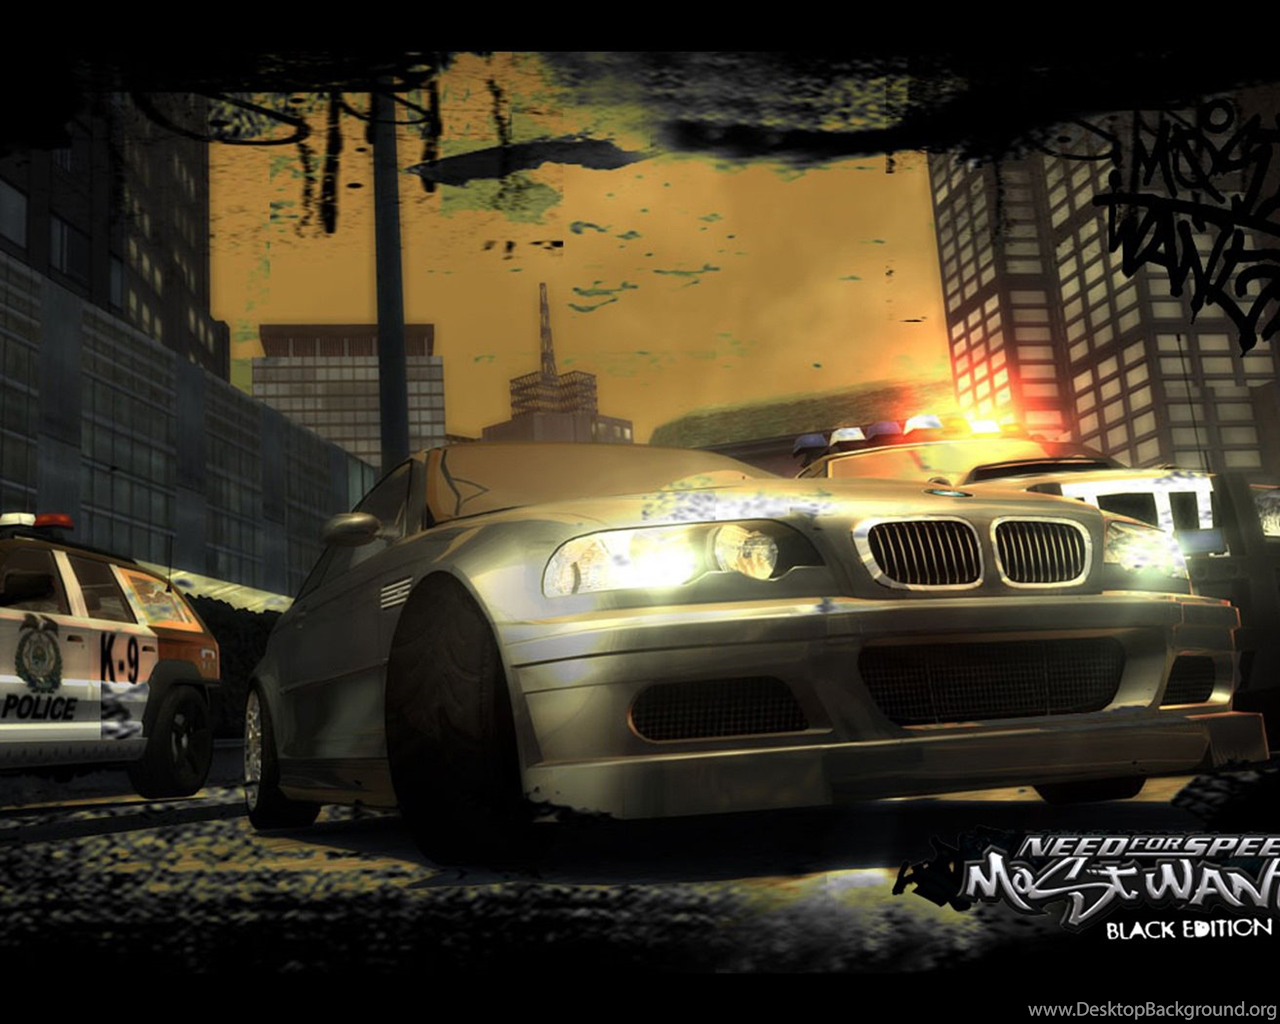 NFS most wanted 2005 мост. NFS most wanted 2005 БМВ. Нфс МВ 2005. NFS MW 2005 BMW. Музыка из мост вантед 2005